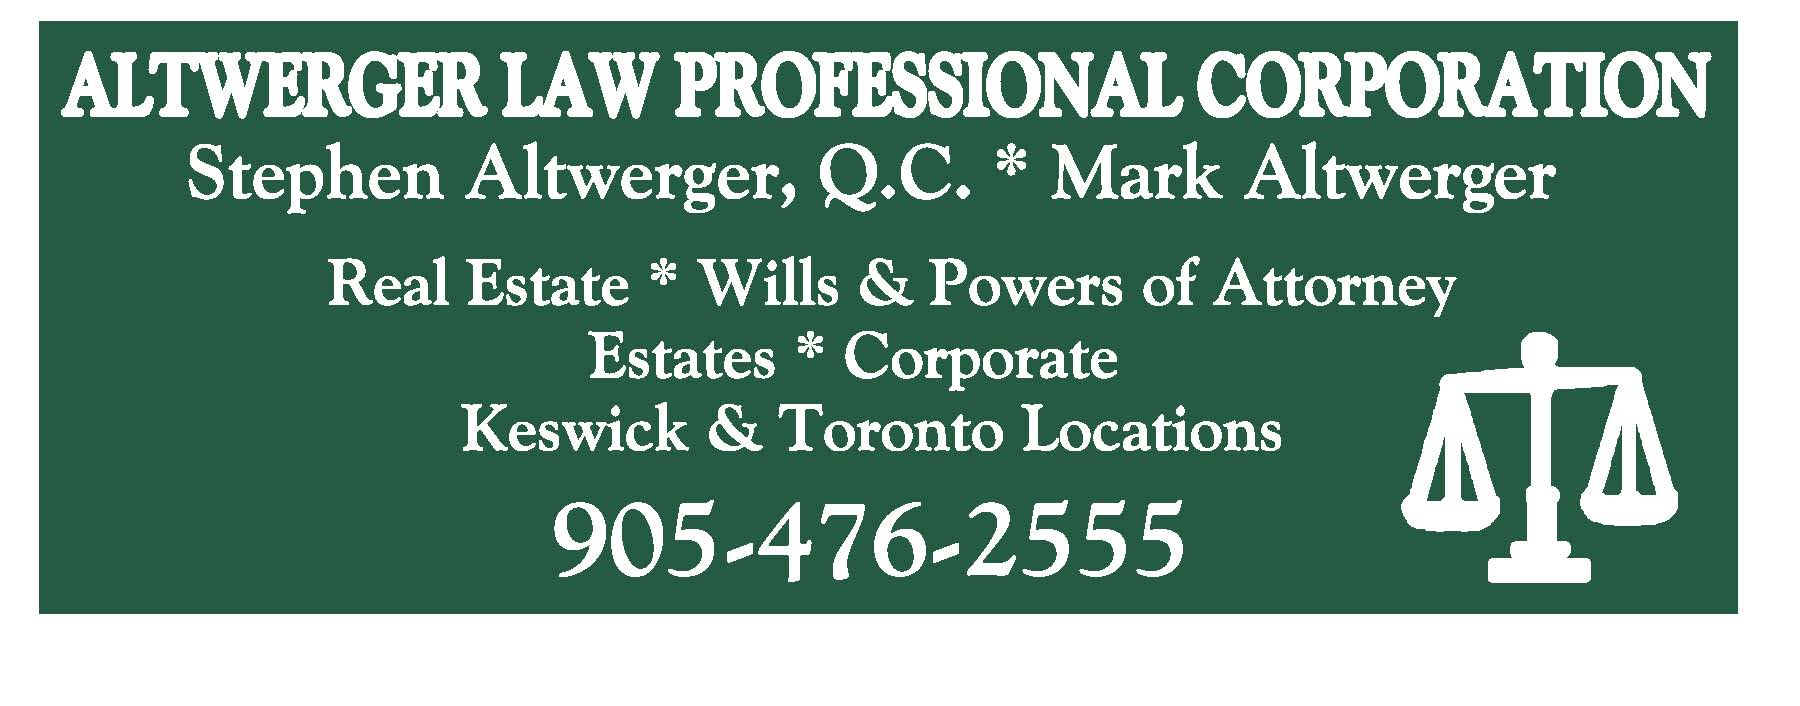 Atwerger Law